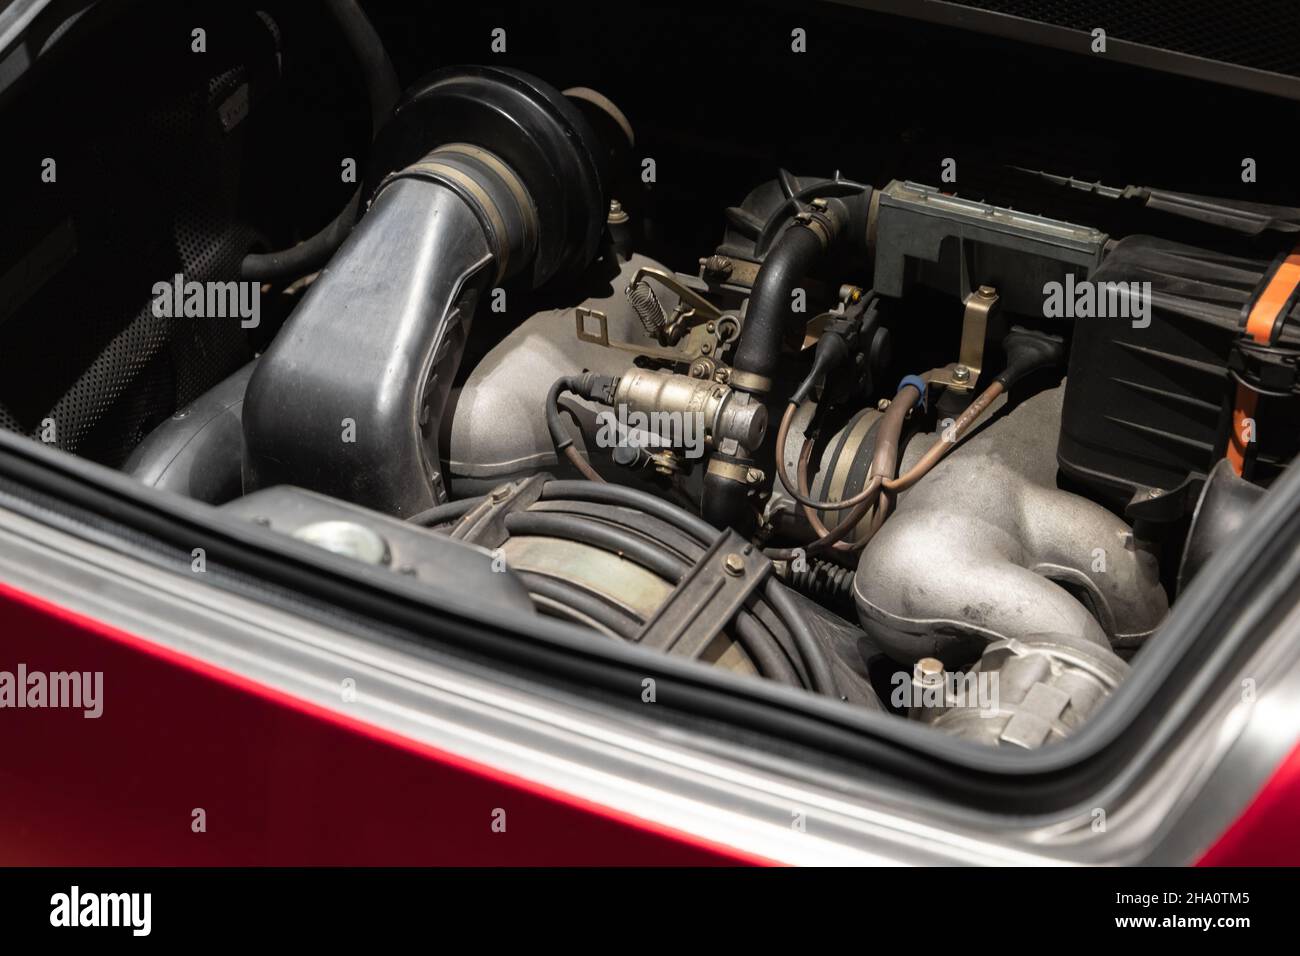 Sports car engine is under open hood, red roadster turbo motor Stock Photo